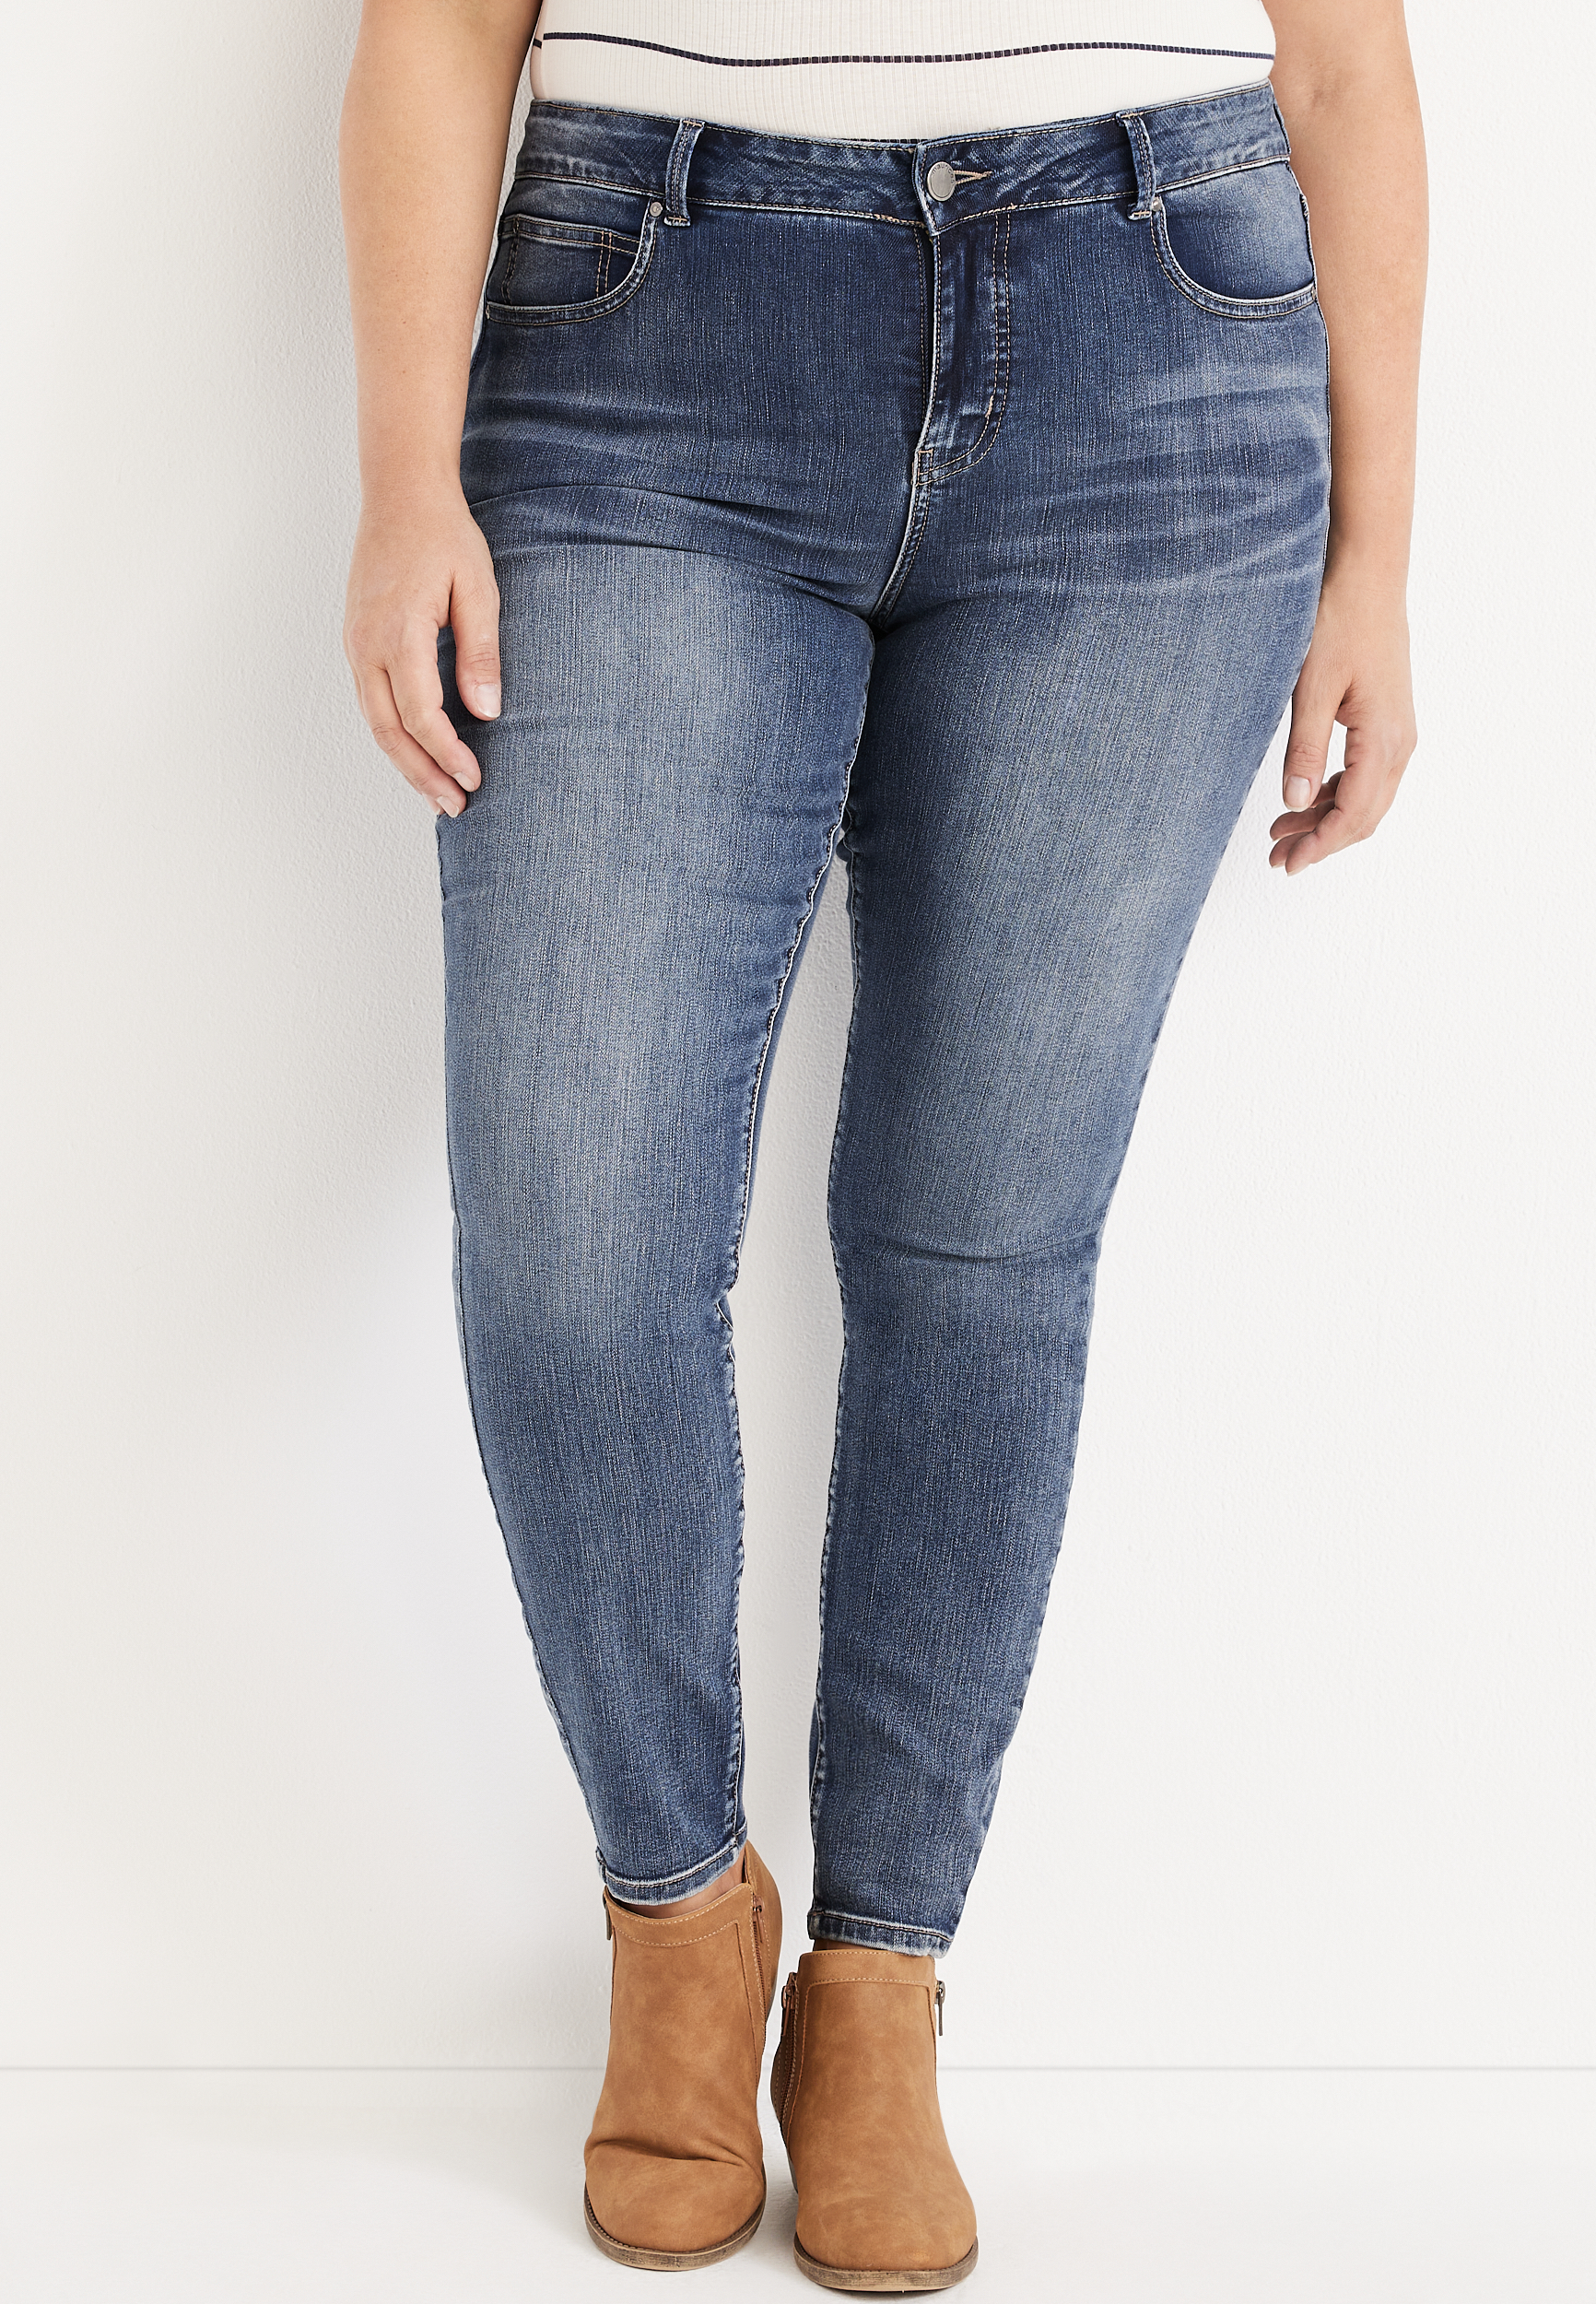 Plus Size m by Everflex™ Skinny Rise Stretch Jean | maurices